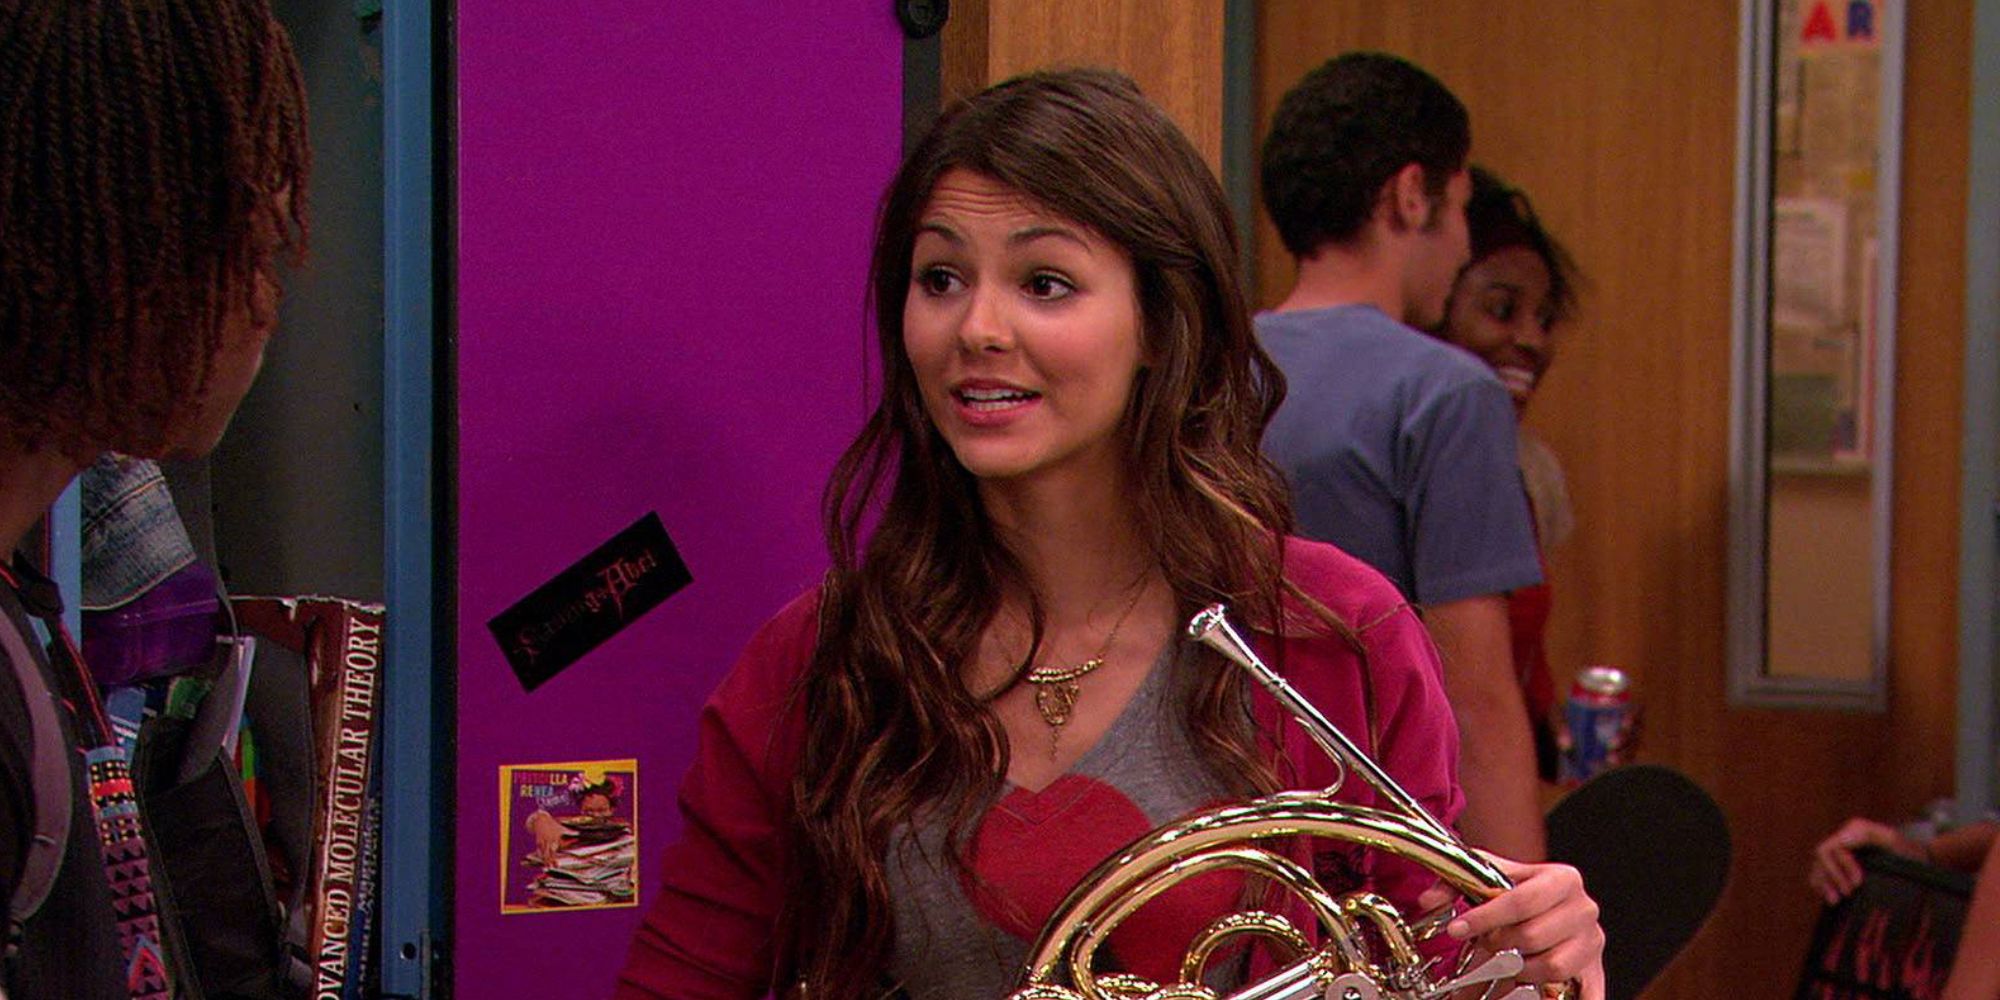 Tori talking to her friends while holding a French horn in Victorious